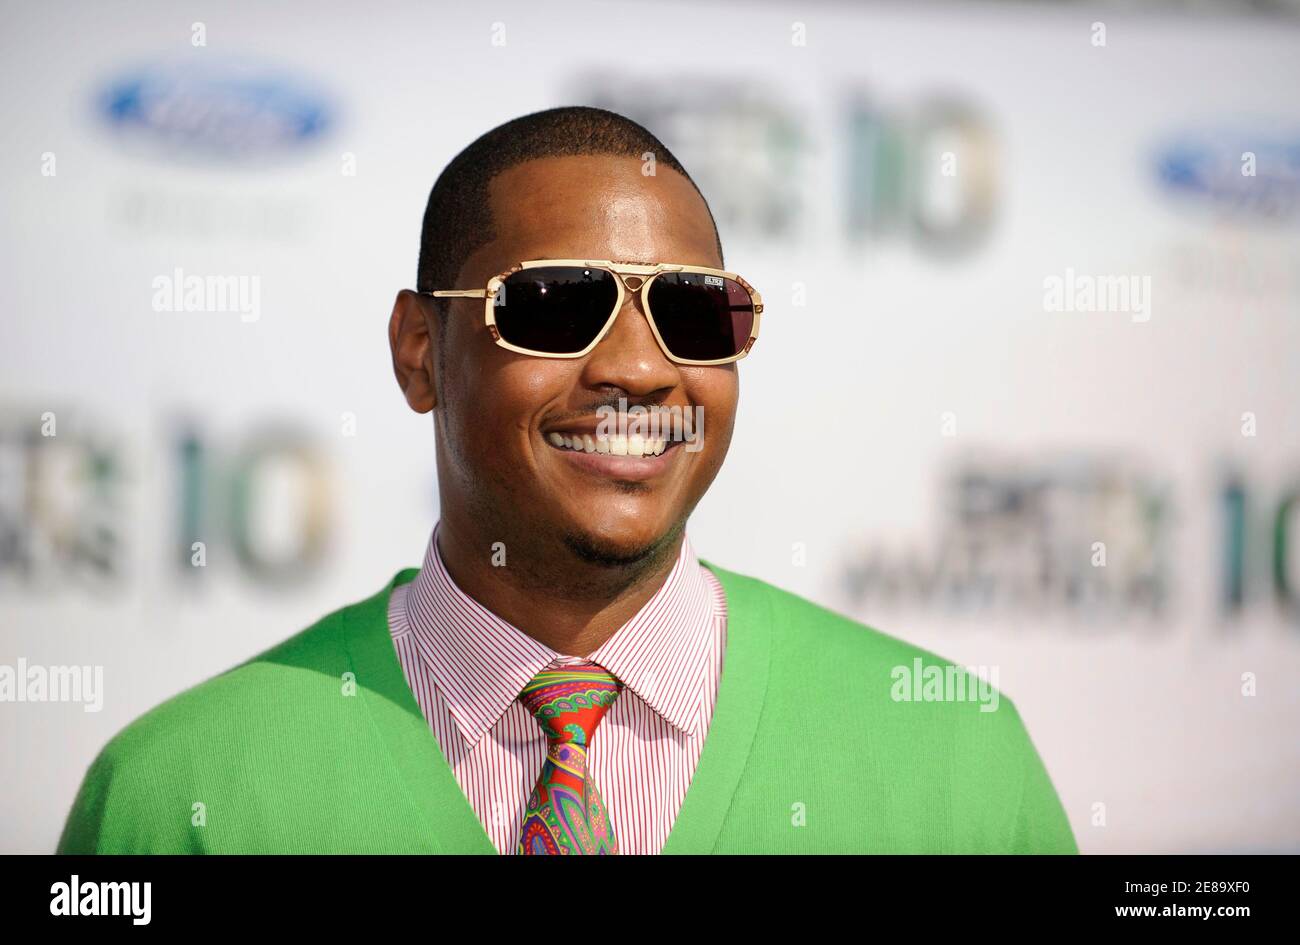 Denver Nuggets NBA player Carmelo Anthony arrives at the 2010 BET Awards in Los Angeles June 27, 2010.  REUTERS/Gus Ruelas (UNITED STATES - Tags: ENTERTAINMENT SPORT BASKETBALL) Stock Photo